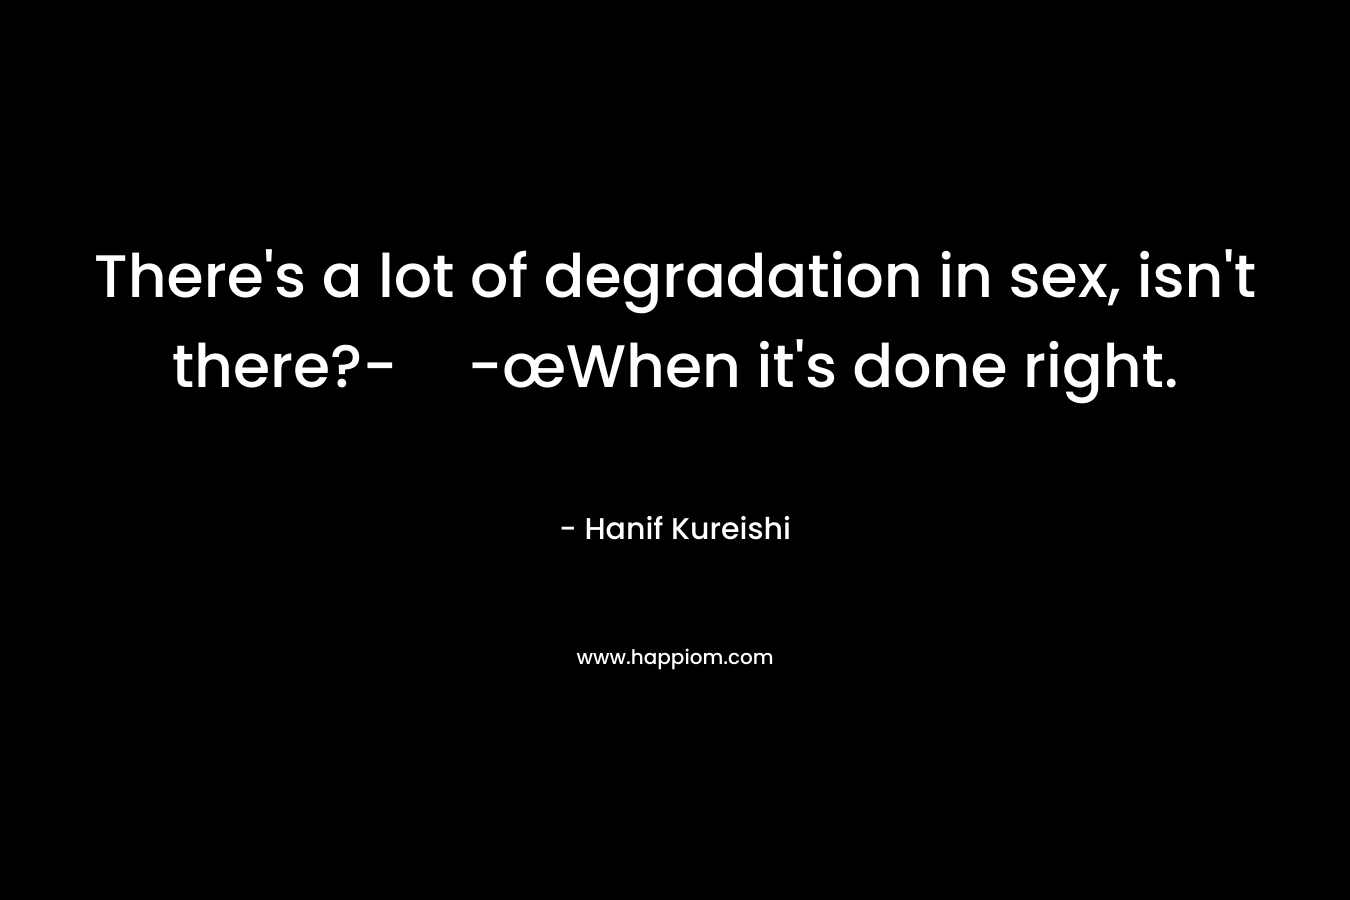 There's a lot of degradation in sex, isn't there?--œWhen it's done right.